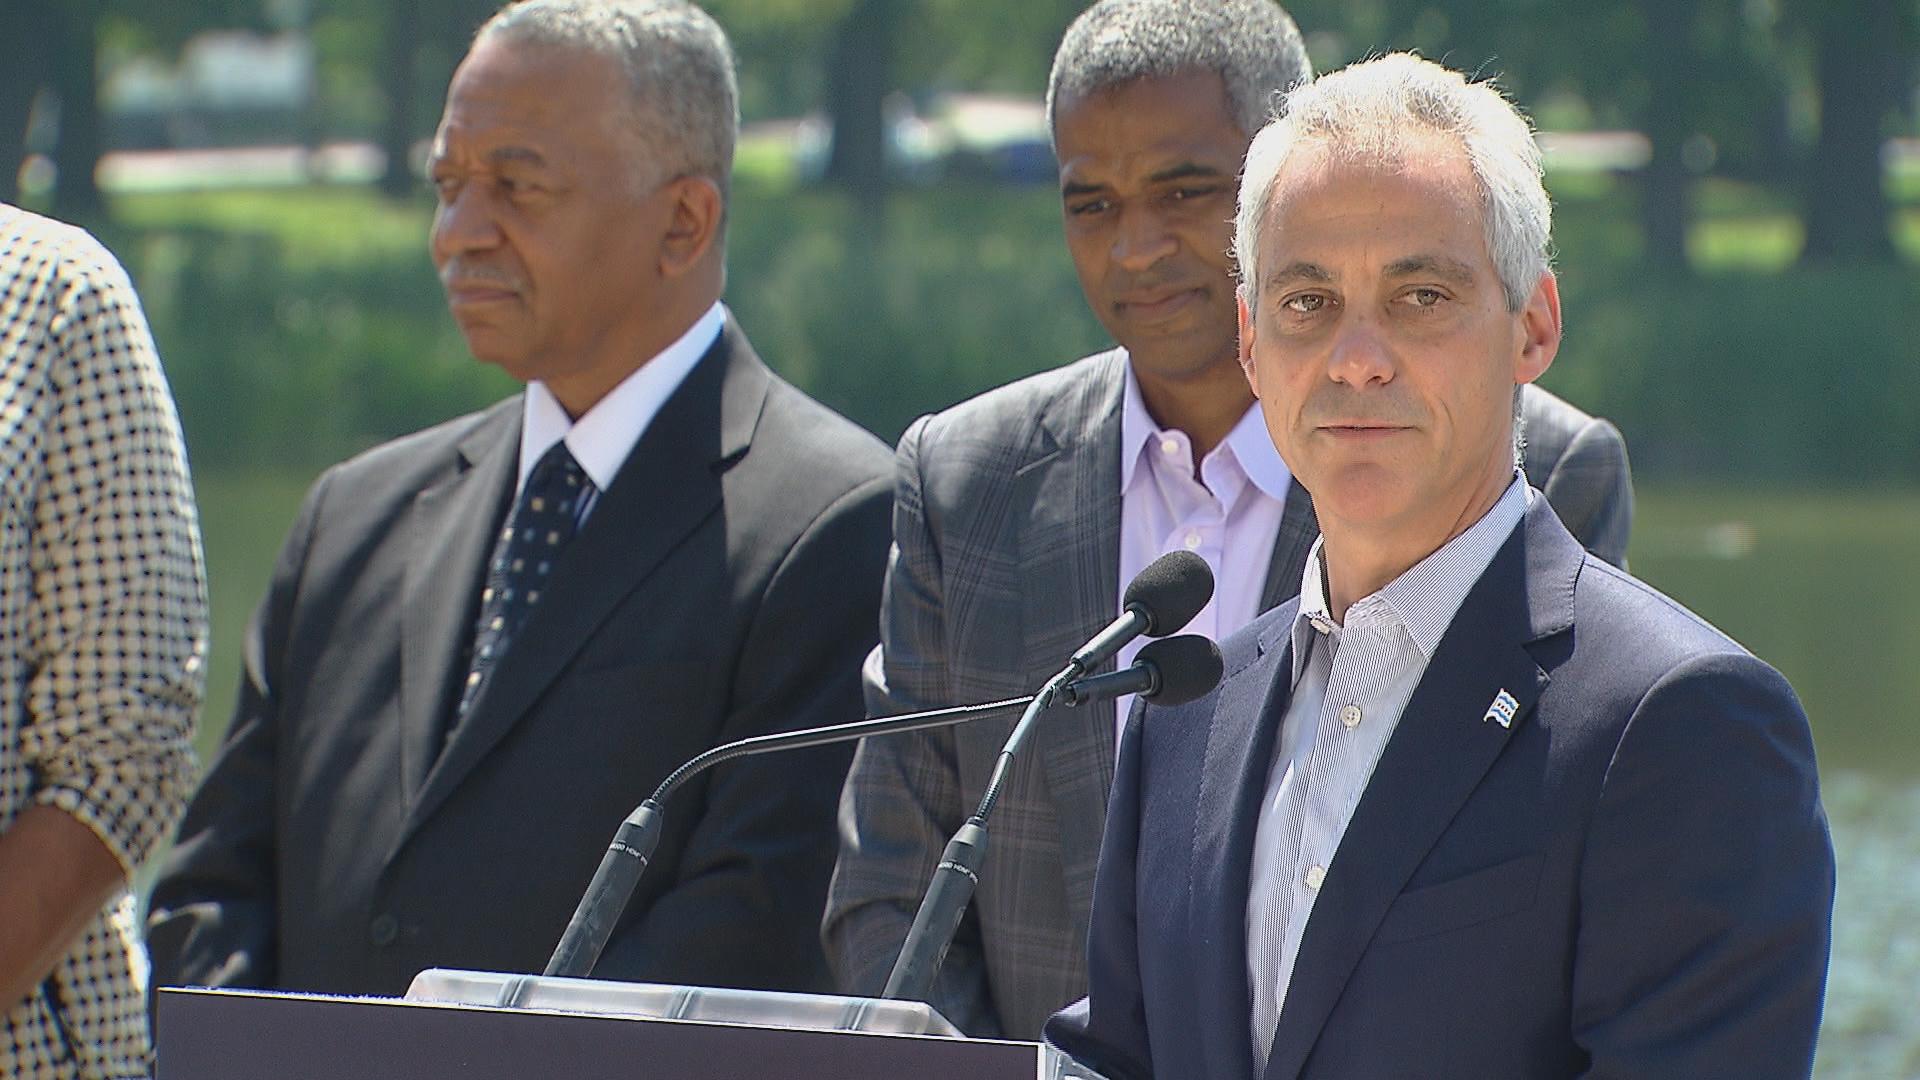 Mayor Rahm Emanuel: “I want to make sure the entire city of Chicago, specifically the South Side of Chicago, benefits from a once-in-a-lifetime cultural and educational investment.”